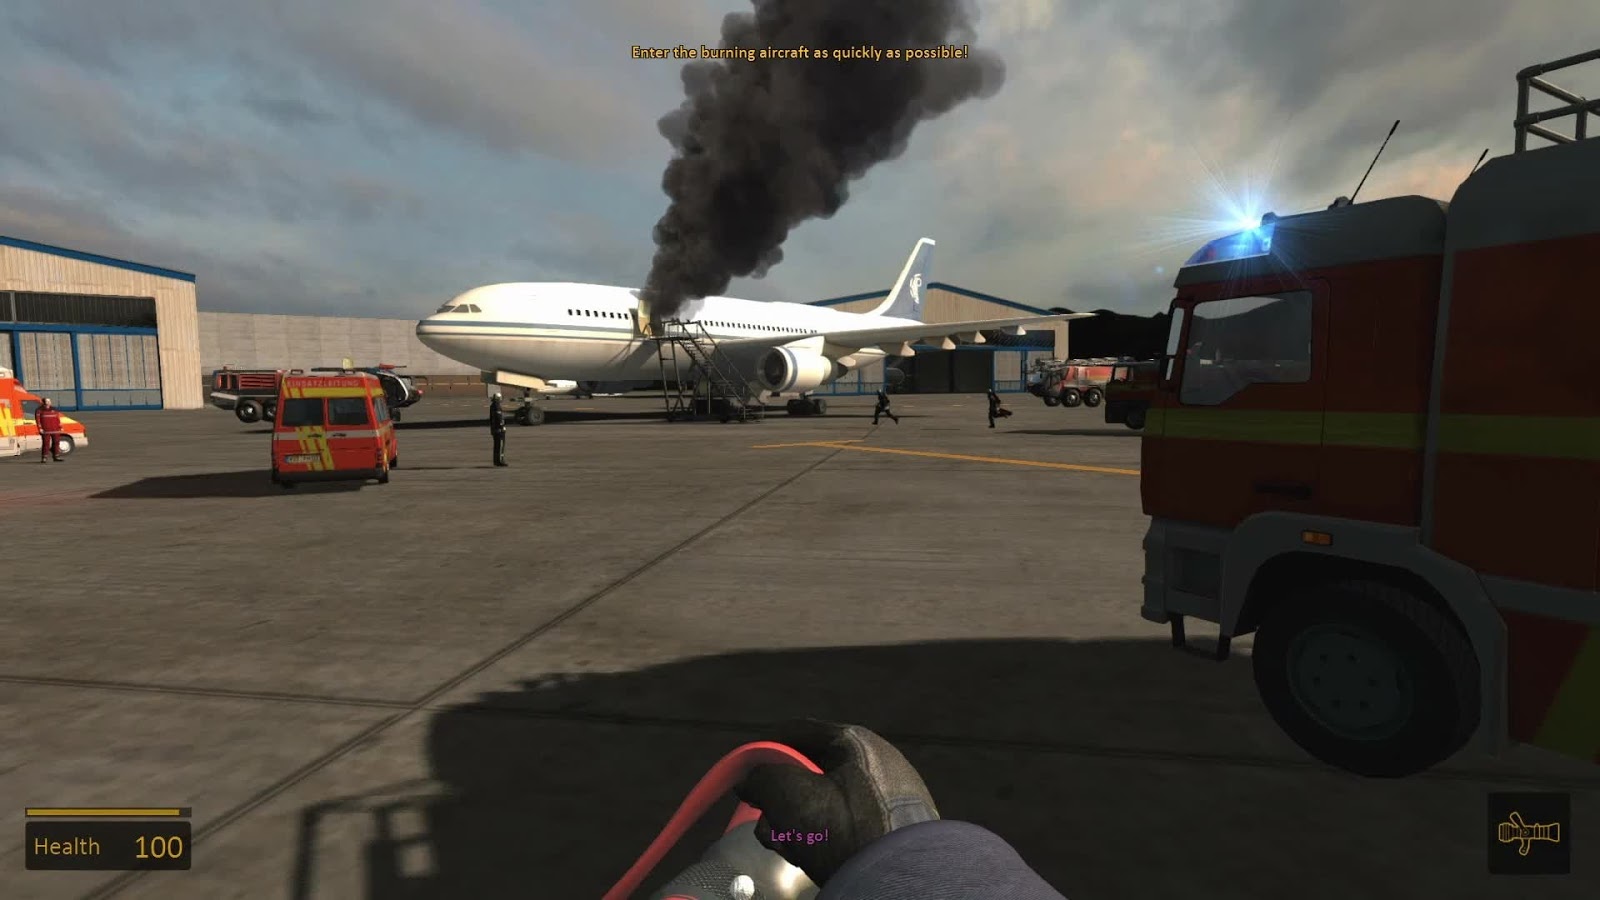 Airport firefighter simulator download crack for gta 5 ps3